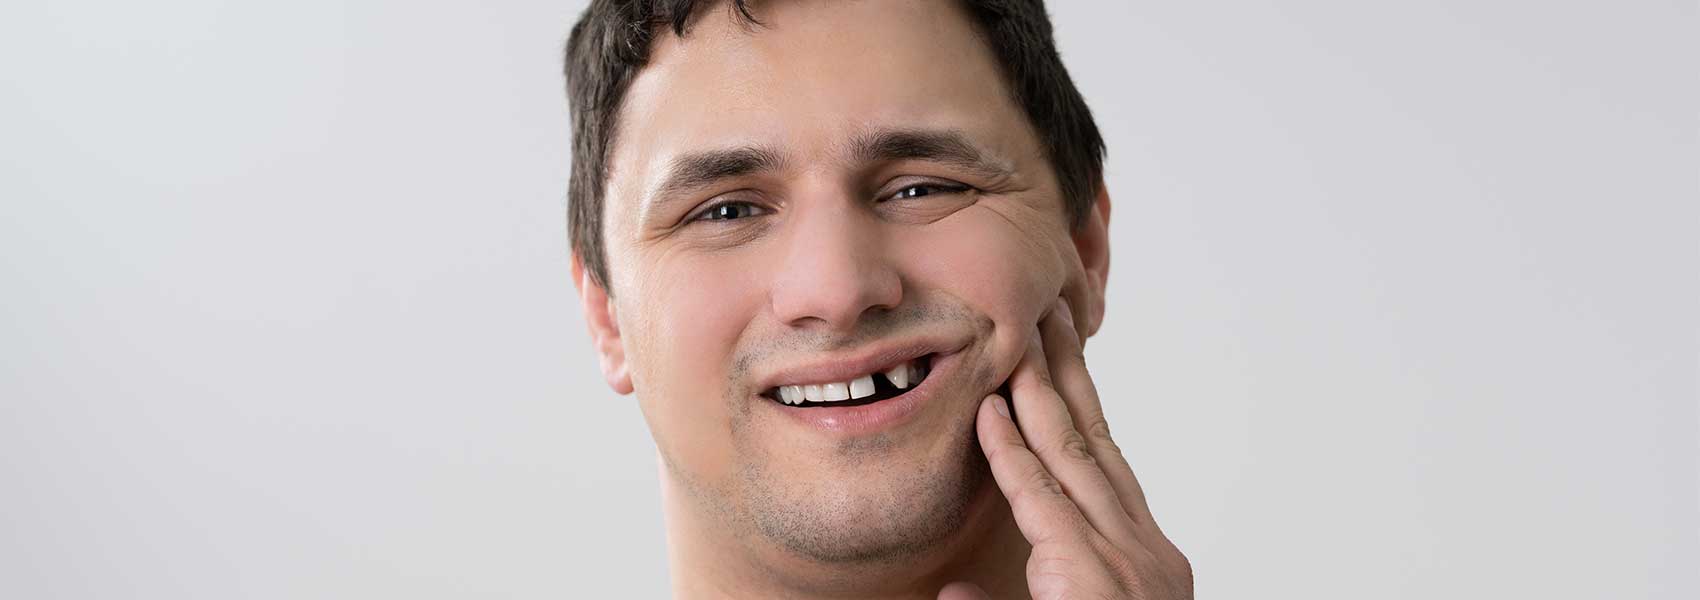 Man smiling with missing tooth